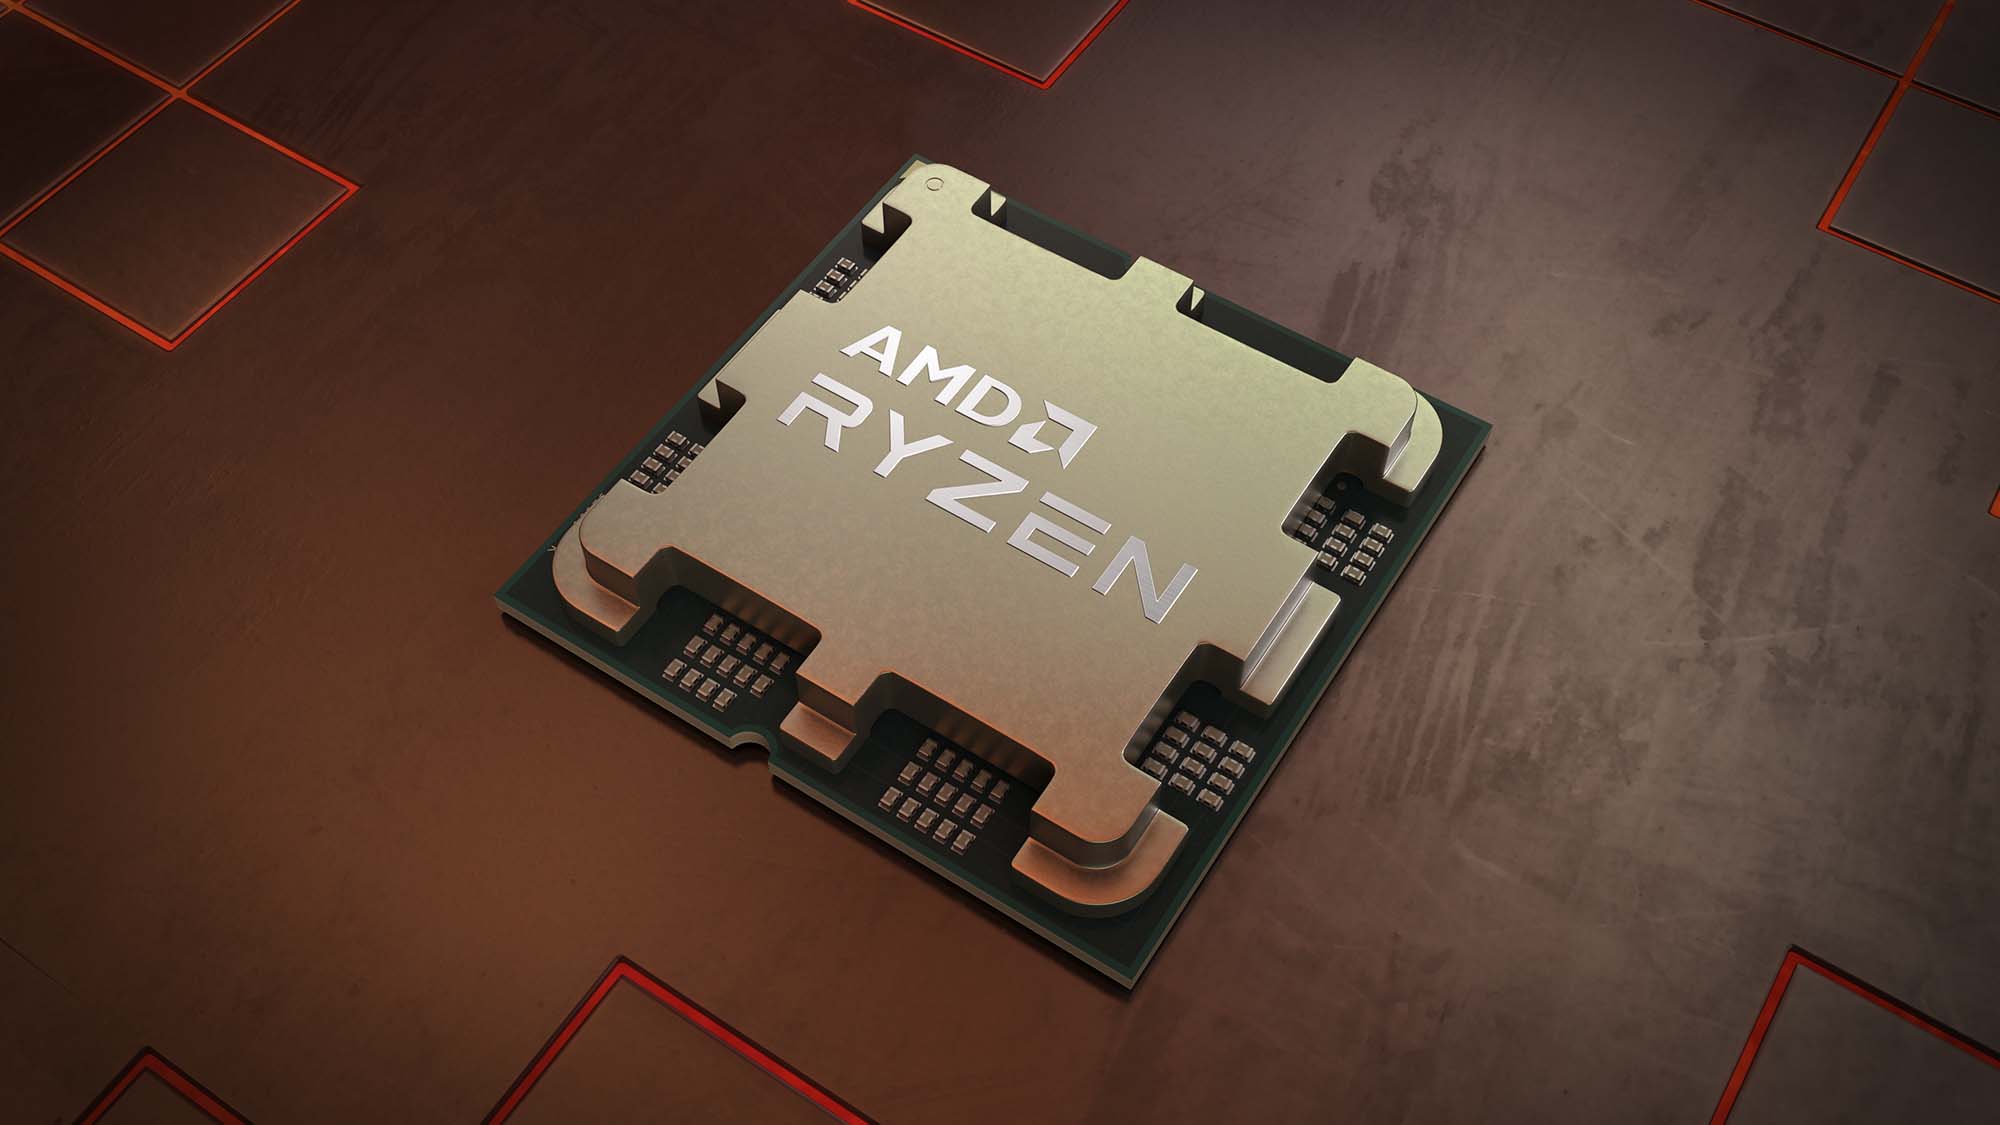 amd’s-strix-point-cpus-for-copilot+-pcs-aren’t-even-out,-but-their-rumored-names-are-already-confusing-everyone